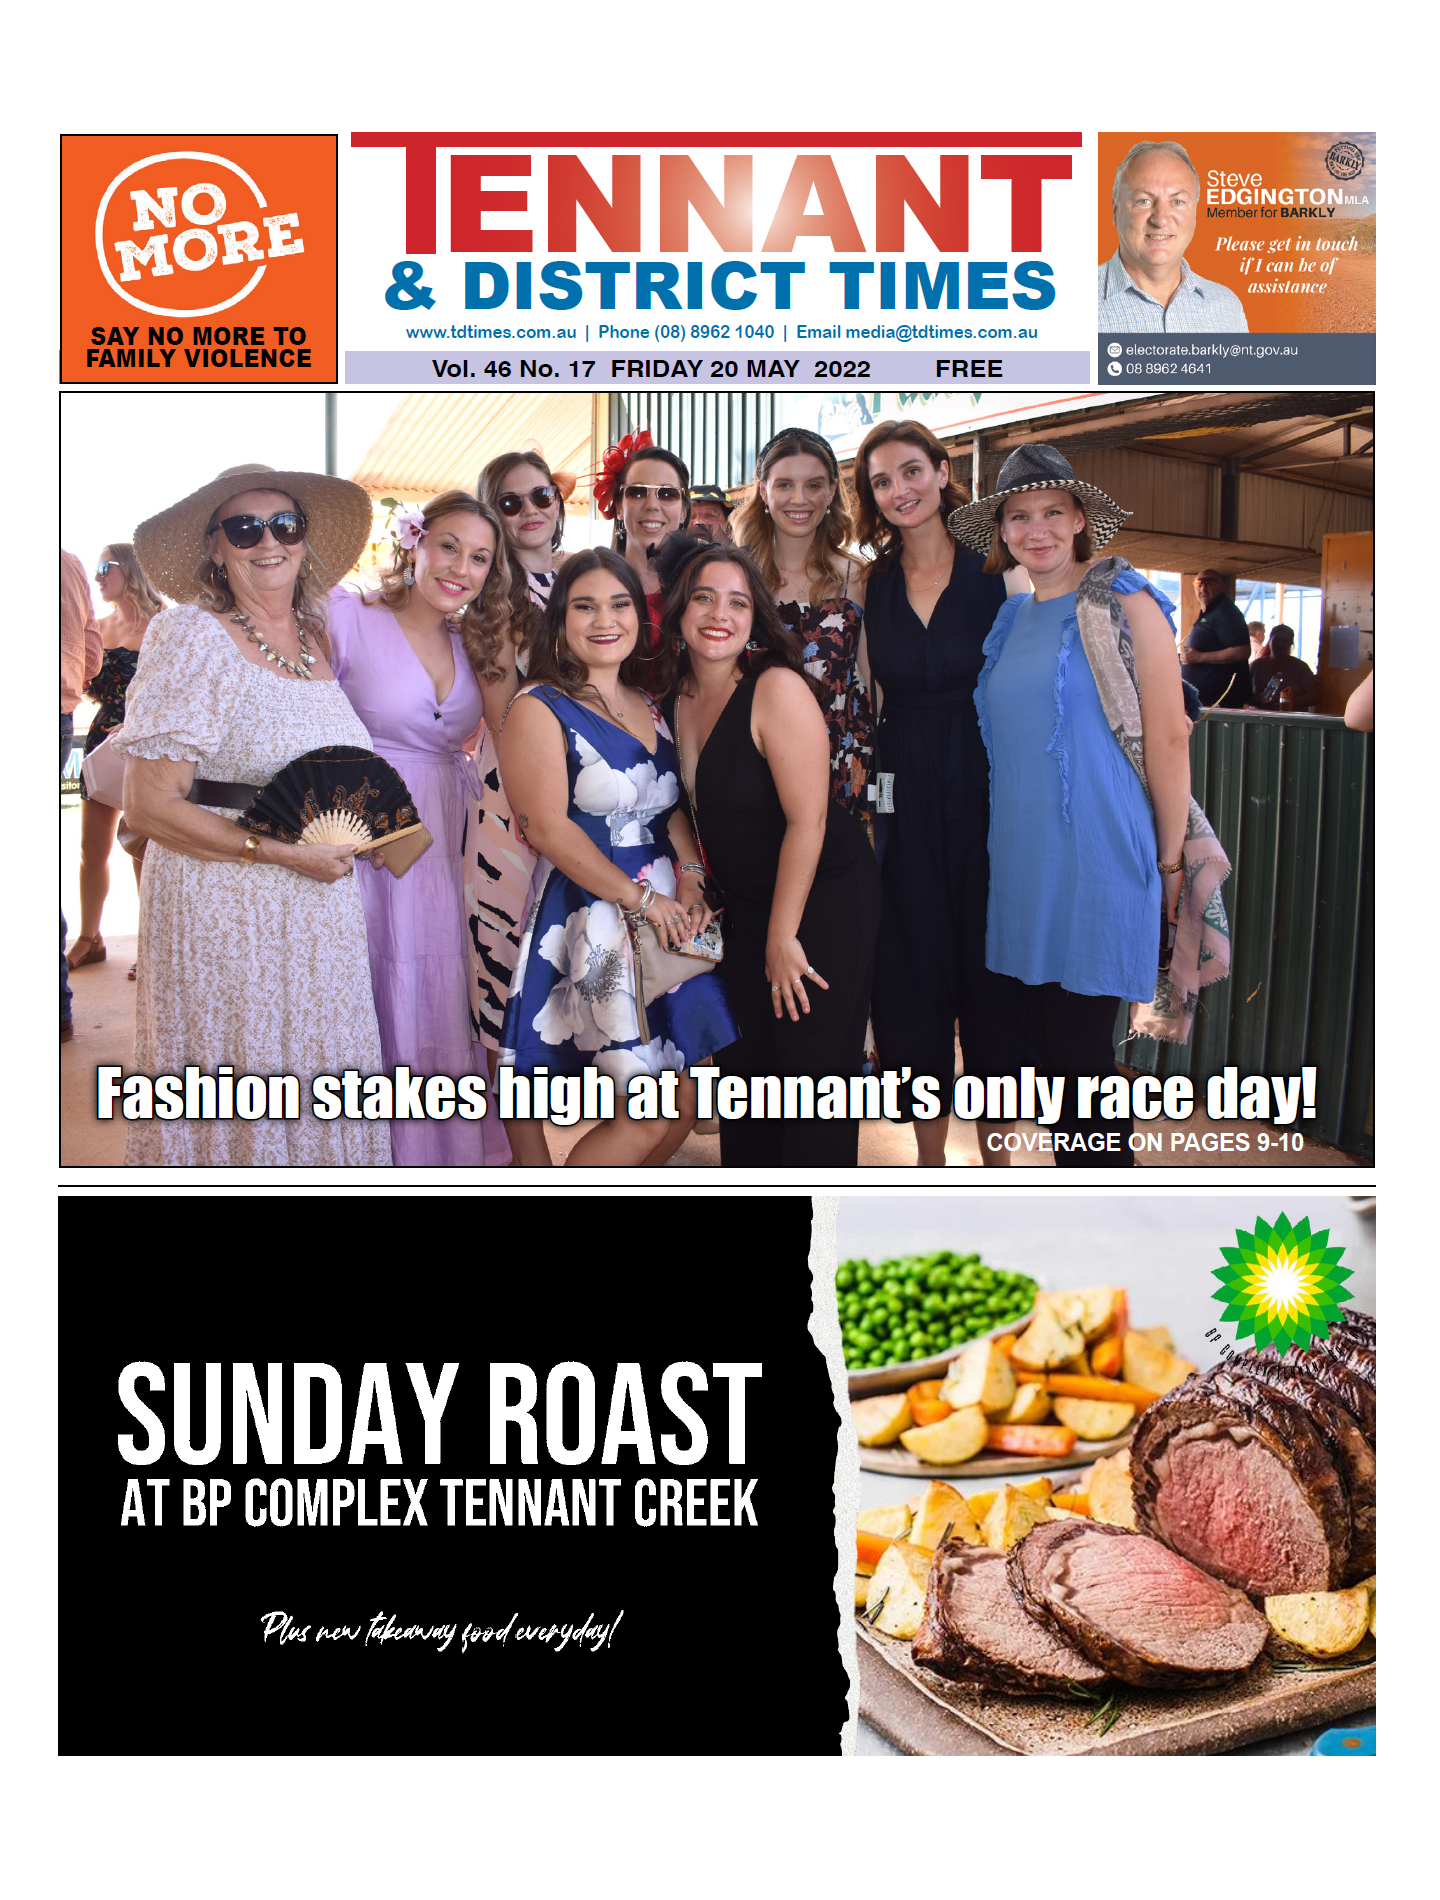 Tennant & District Times 20 May 2022